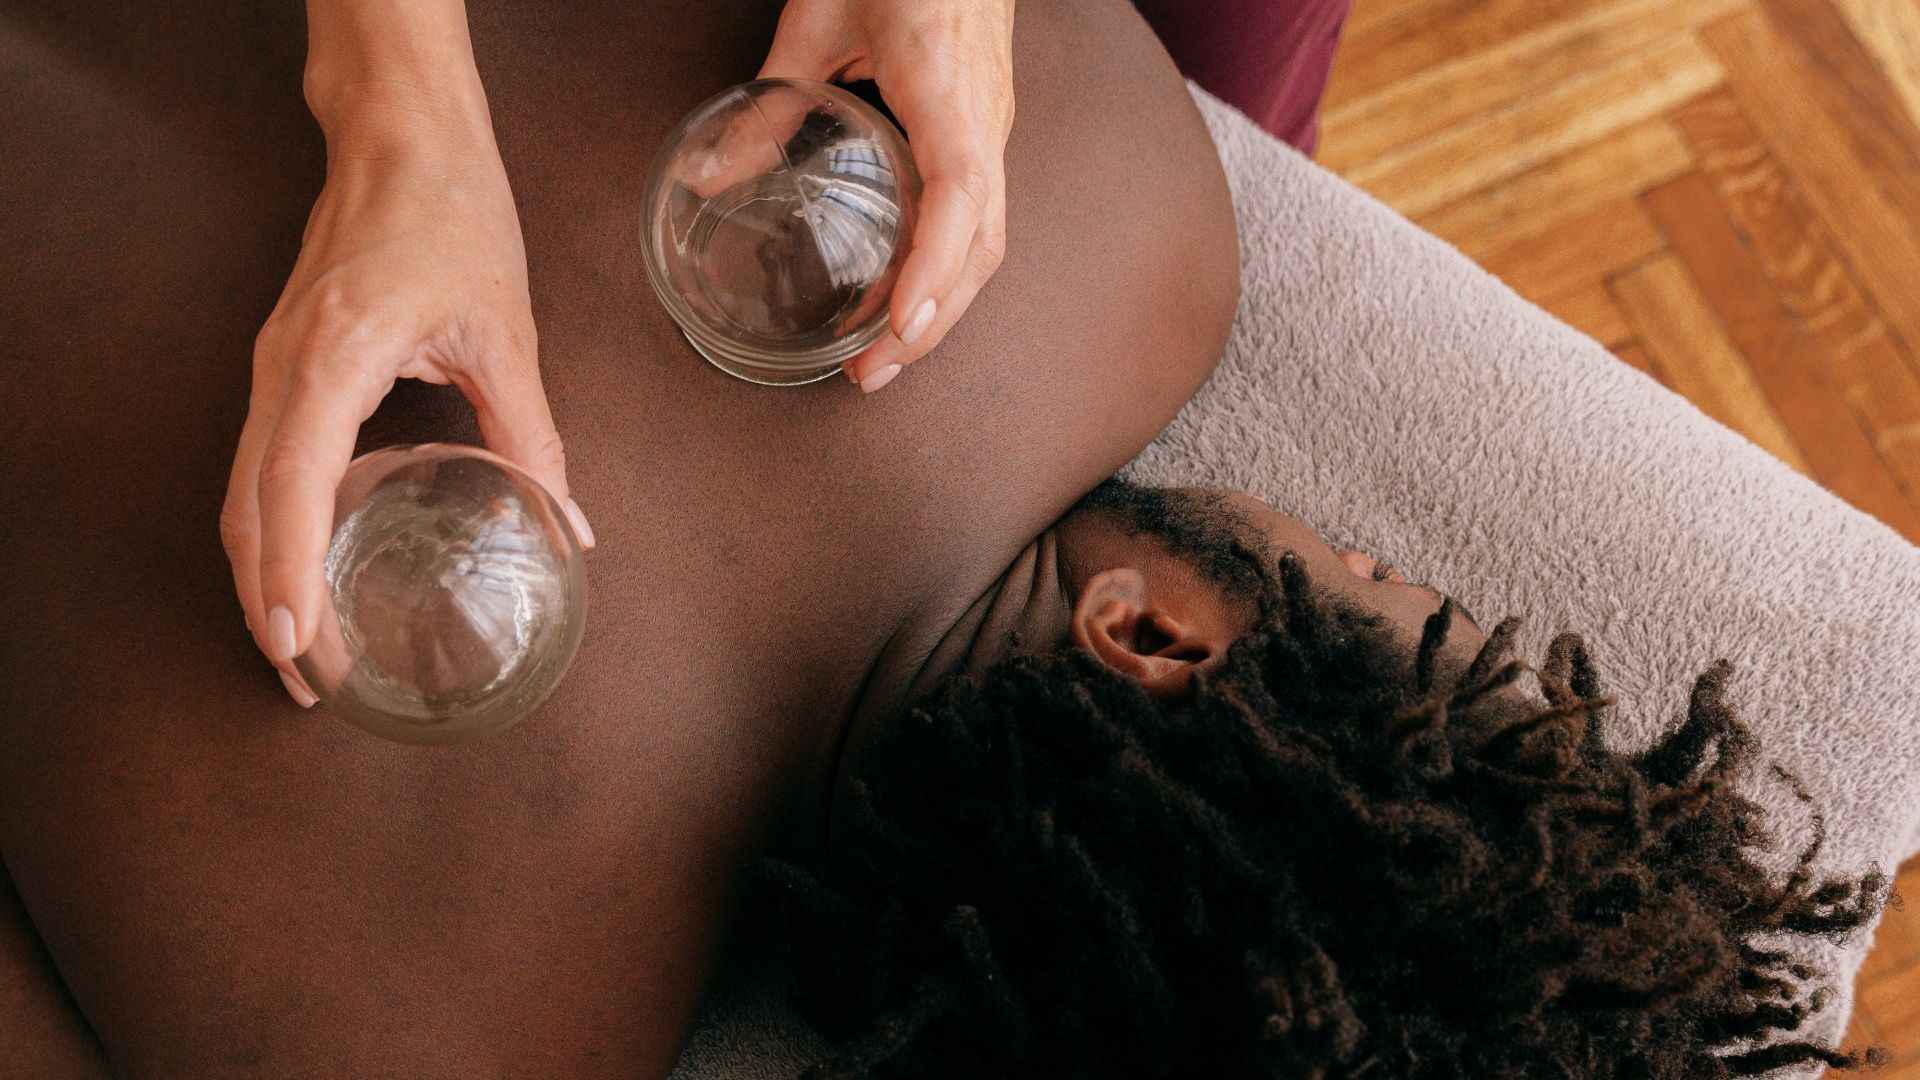 a man is getting a cupping treatment on his back